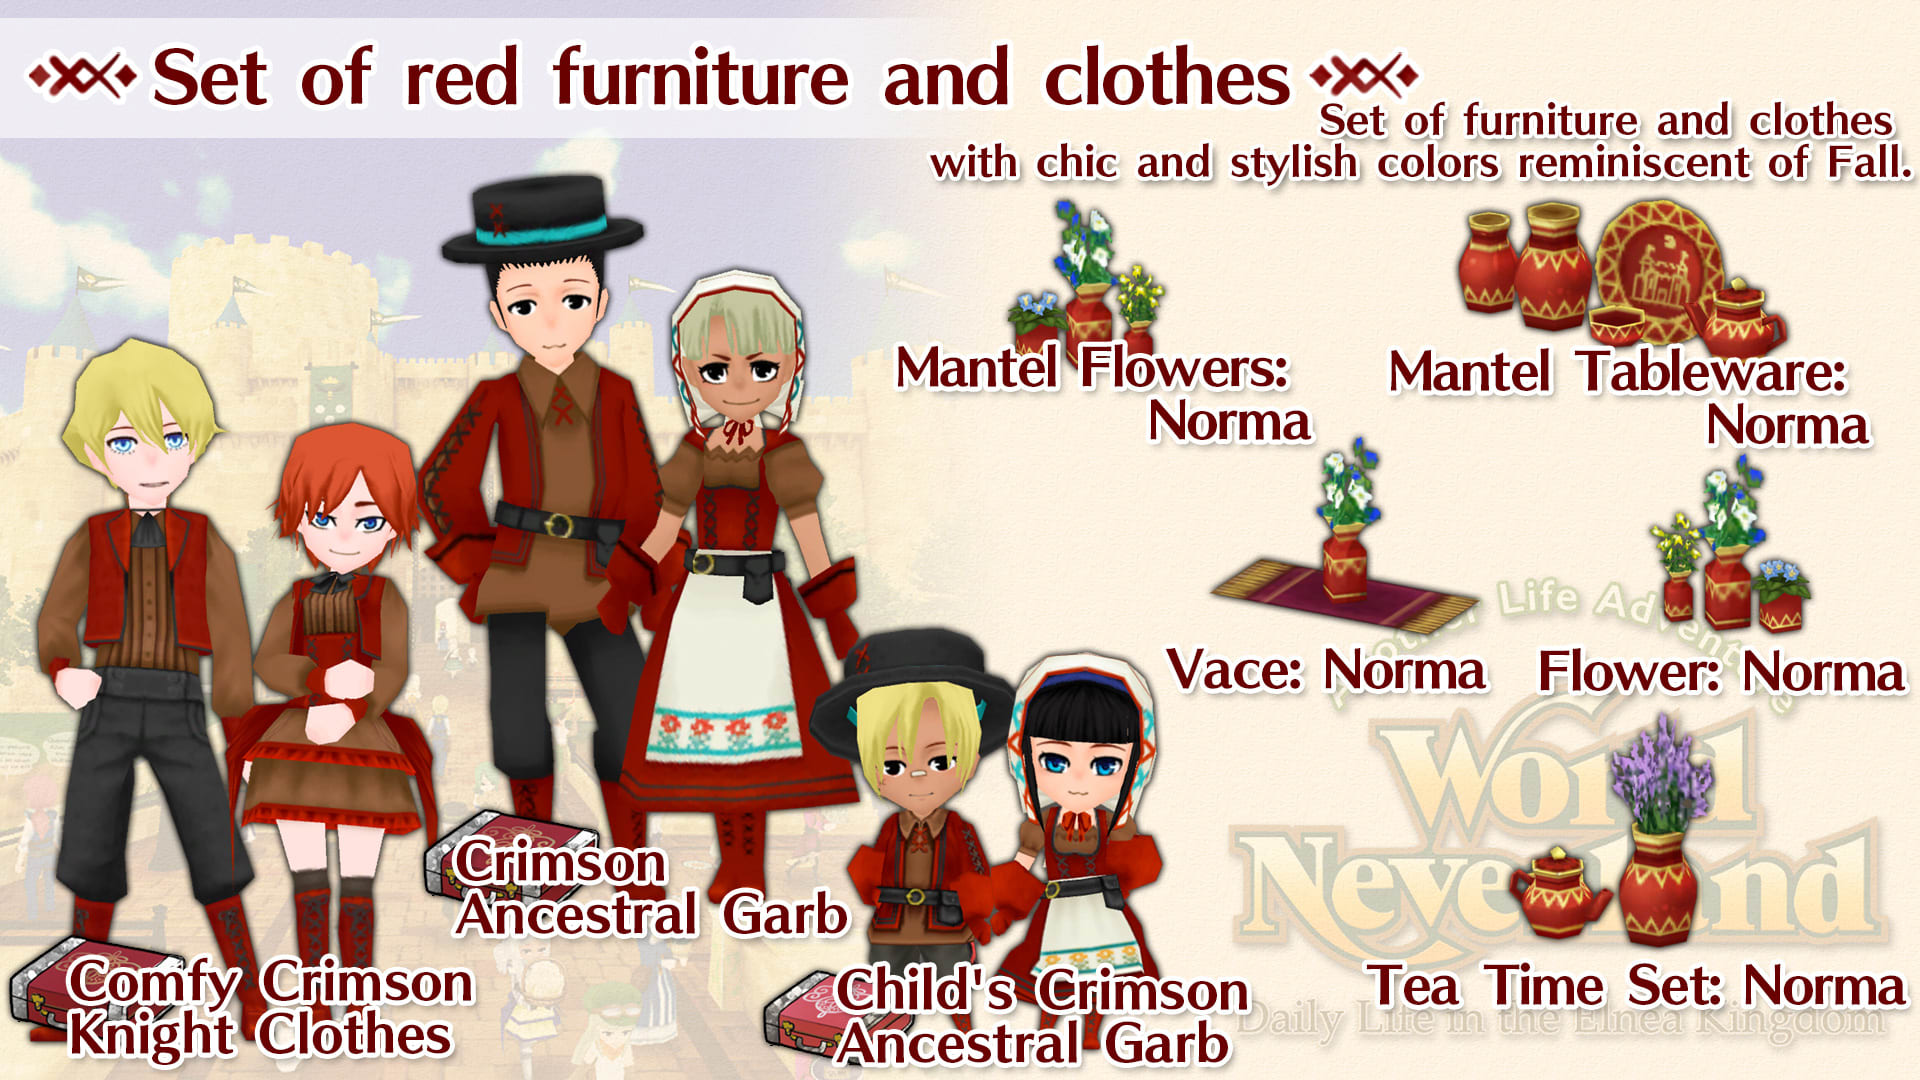 Set of red furniture and clothes